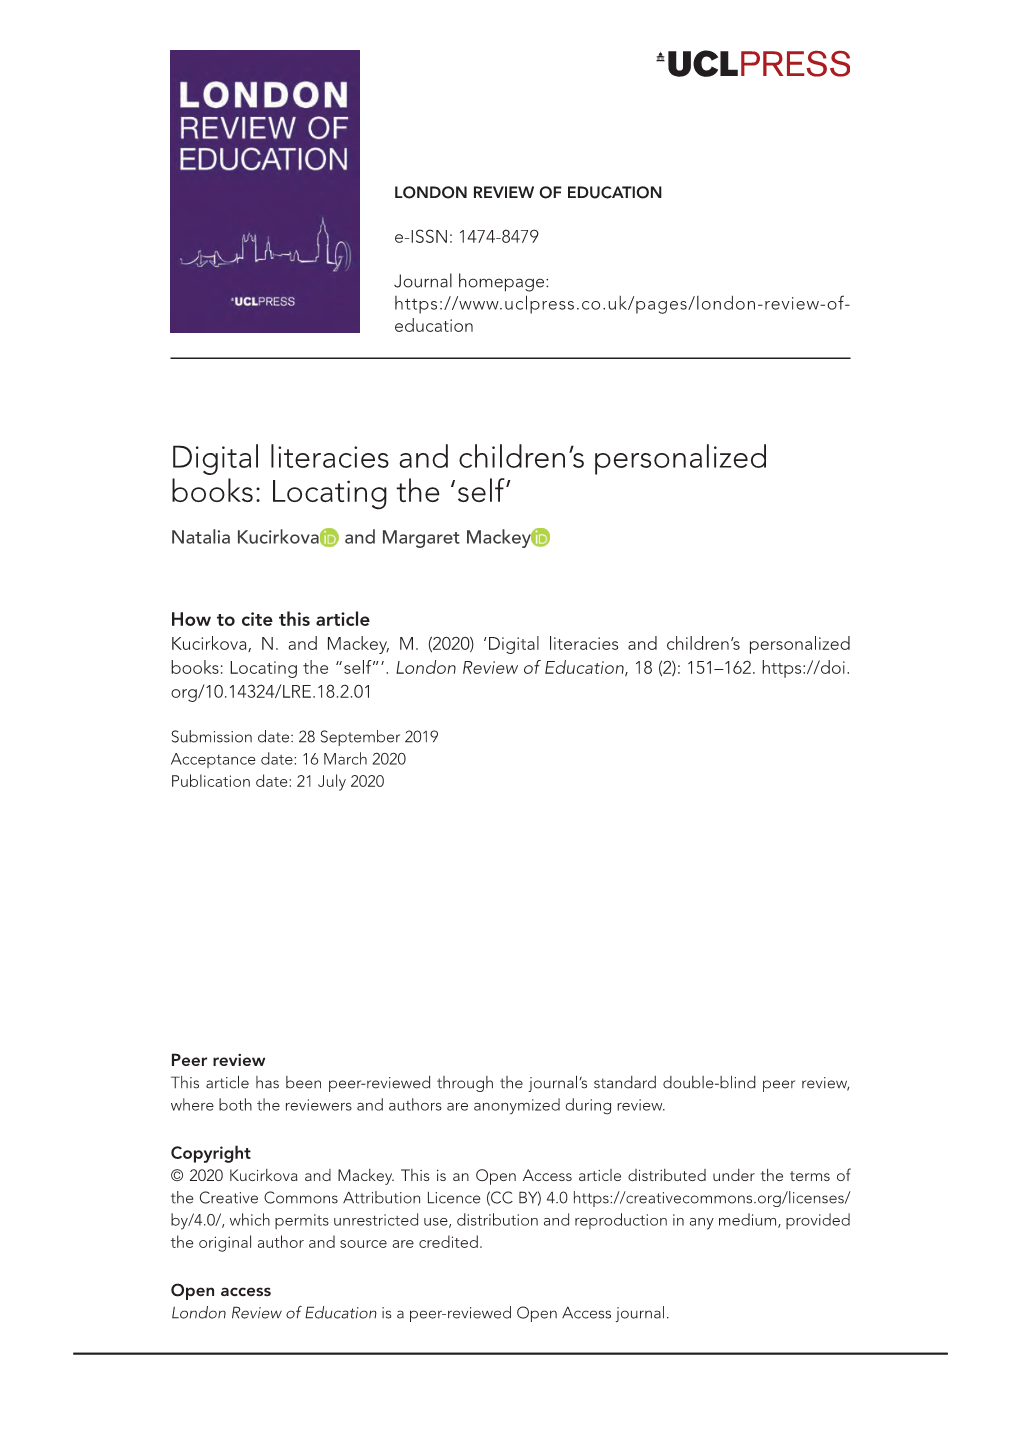 Digital Literacies and Children's Personalized Books